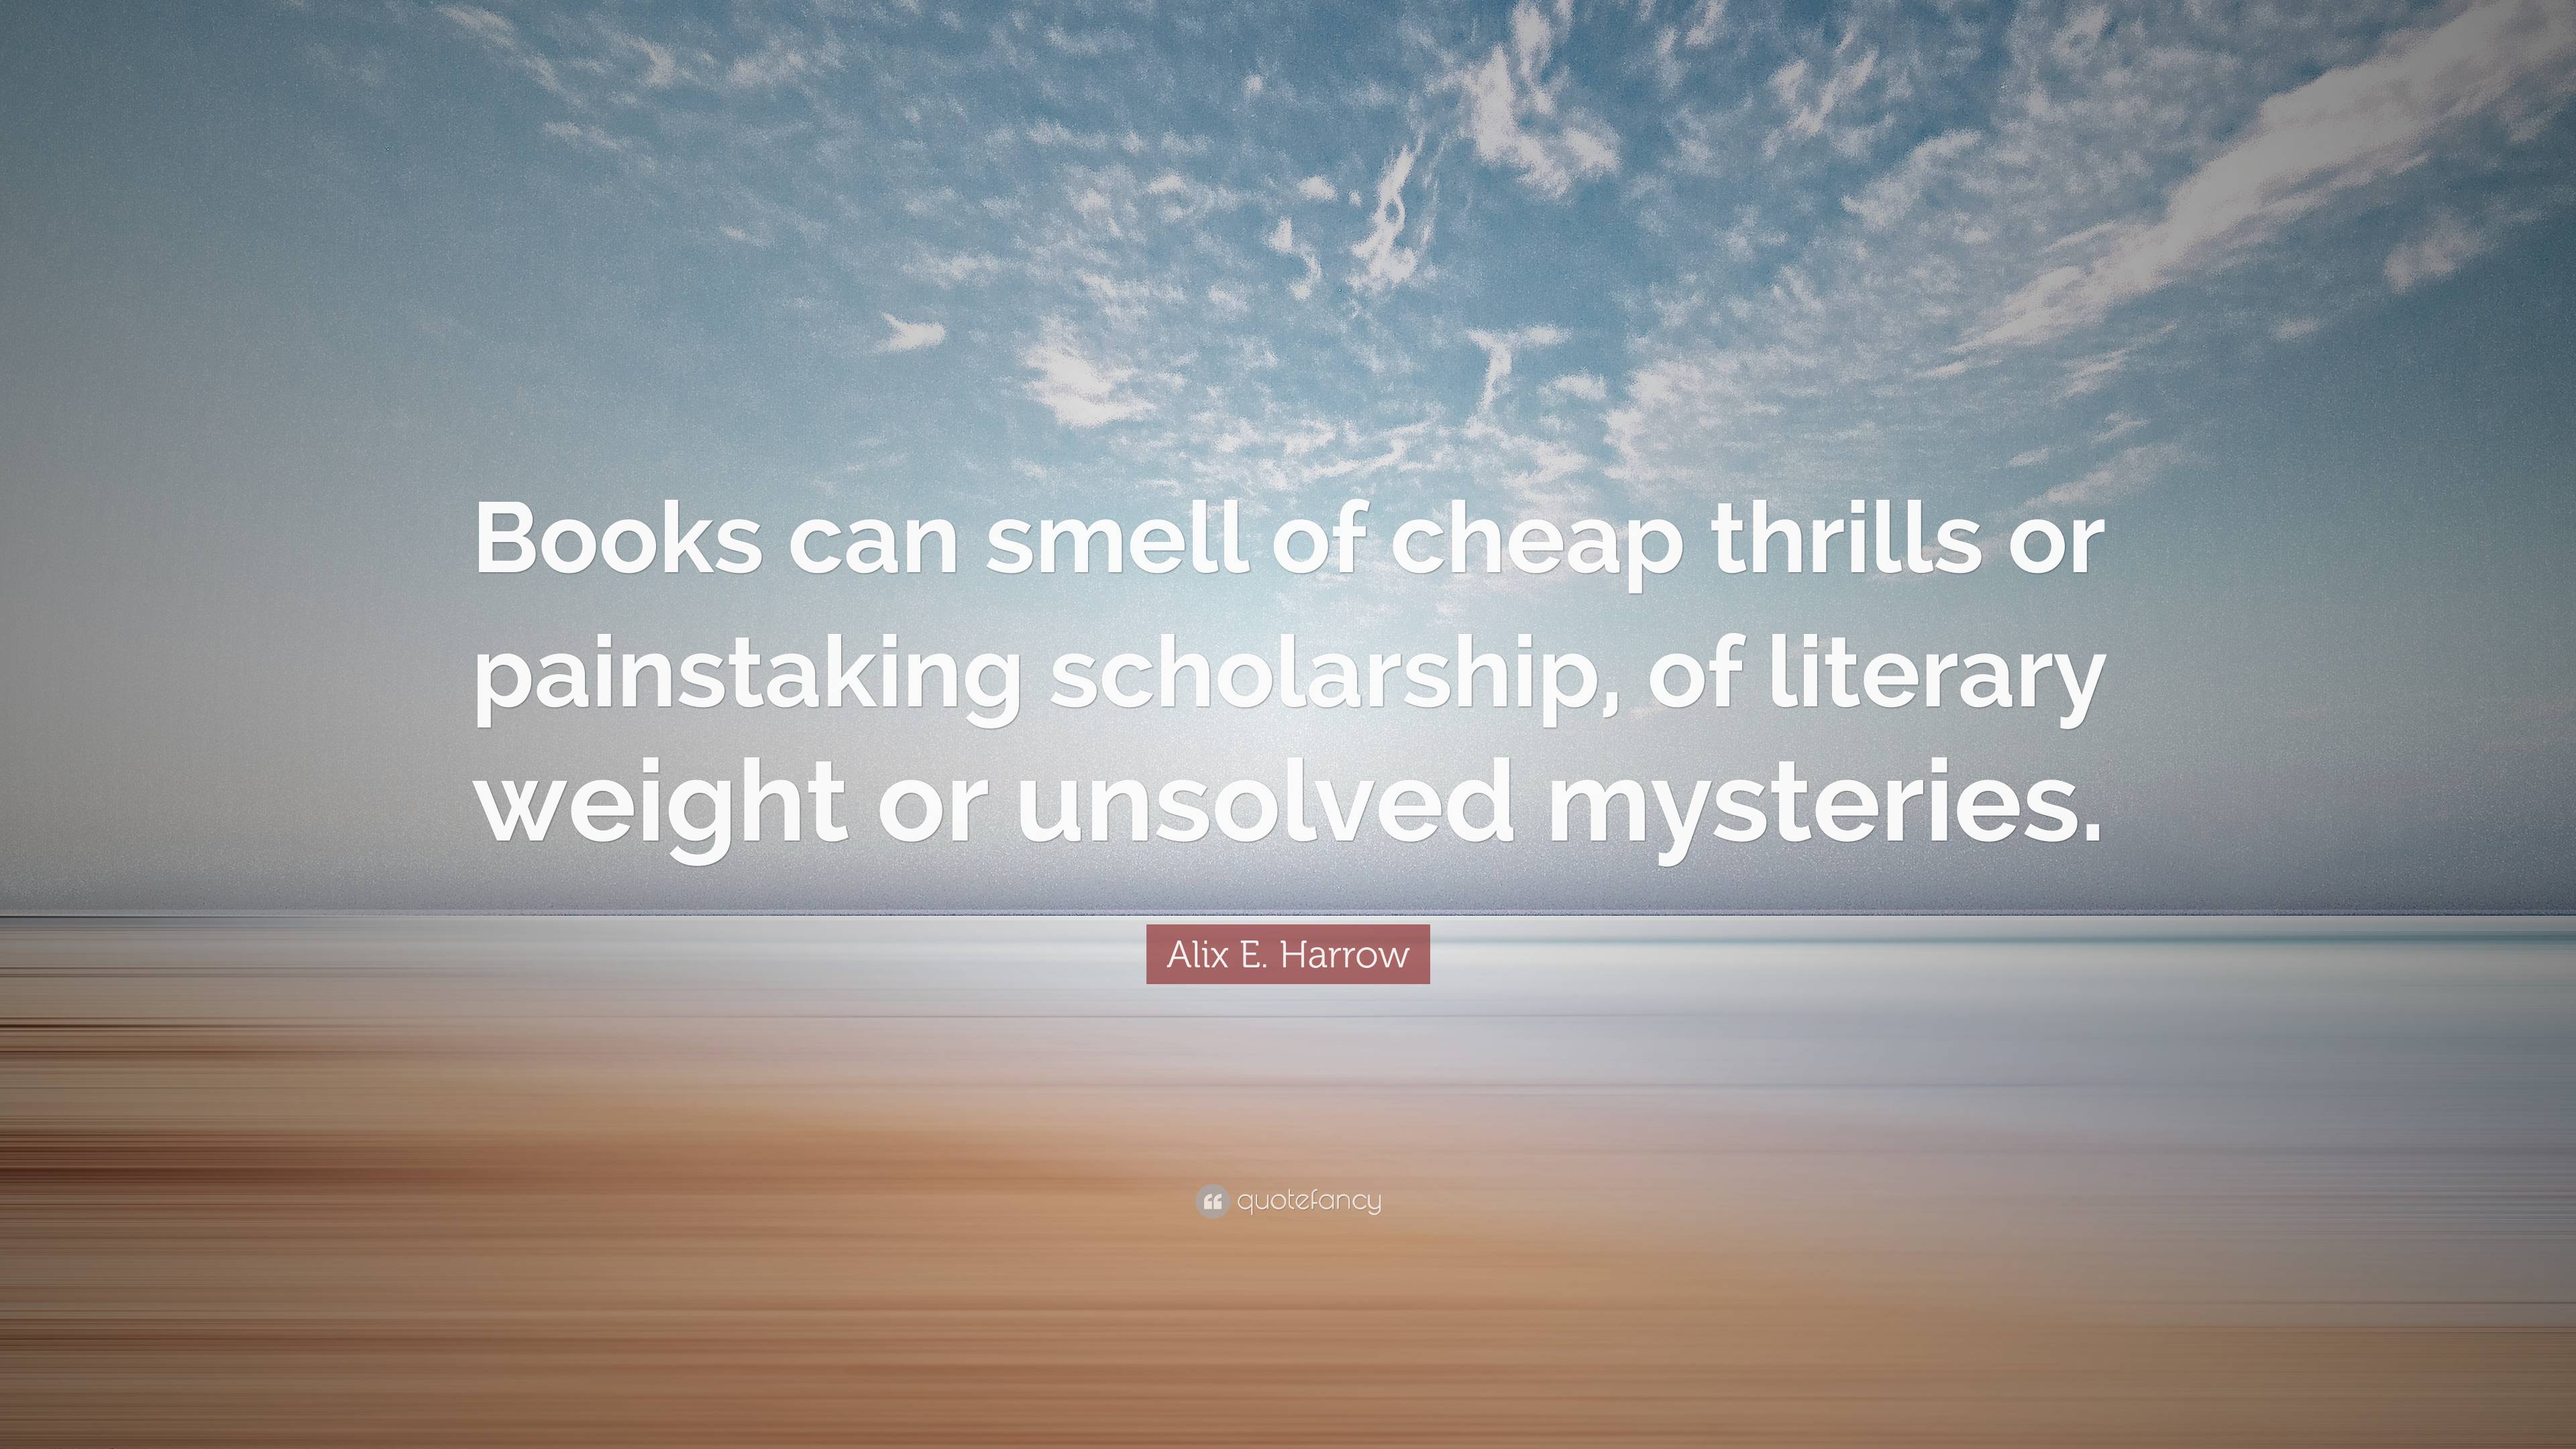 Alix E. Harrow Quote: “Books can smell of cheap thrills or painstaking ...